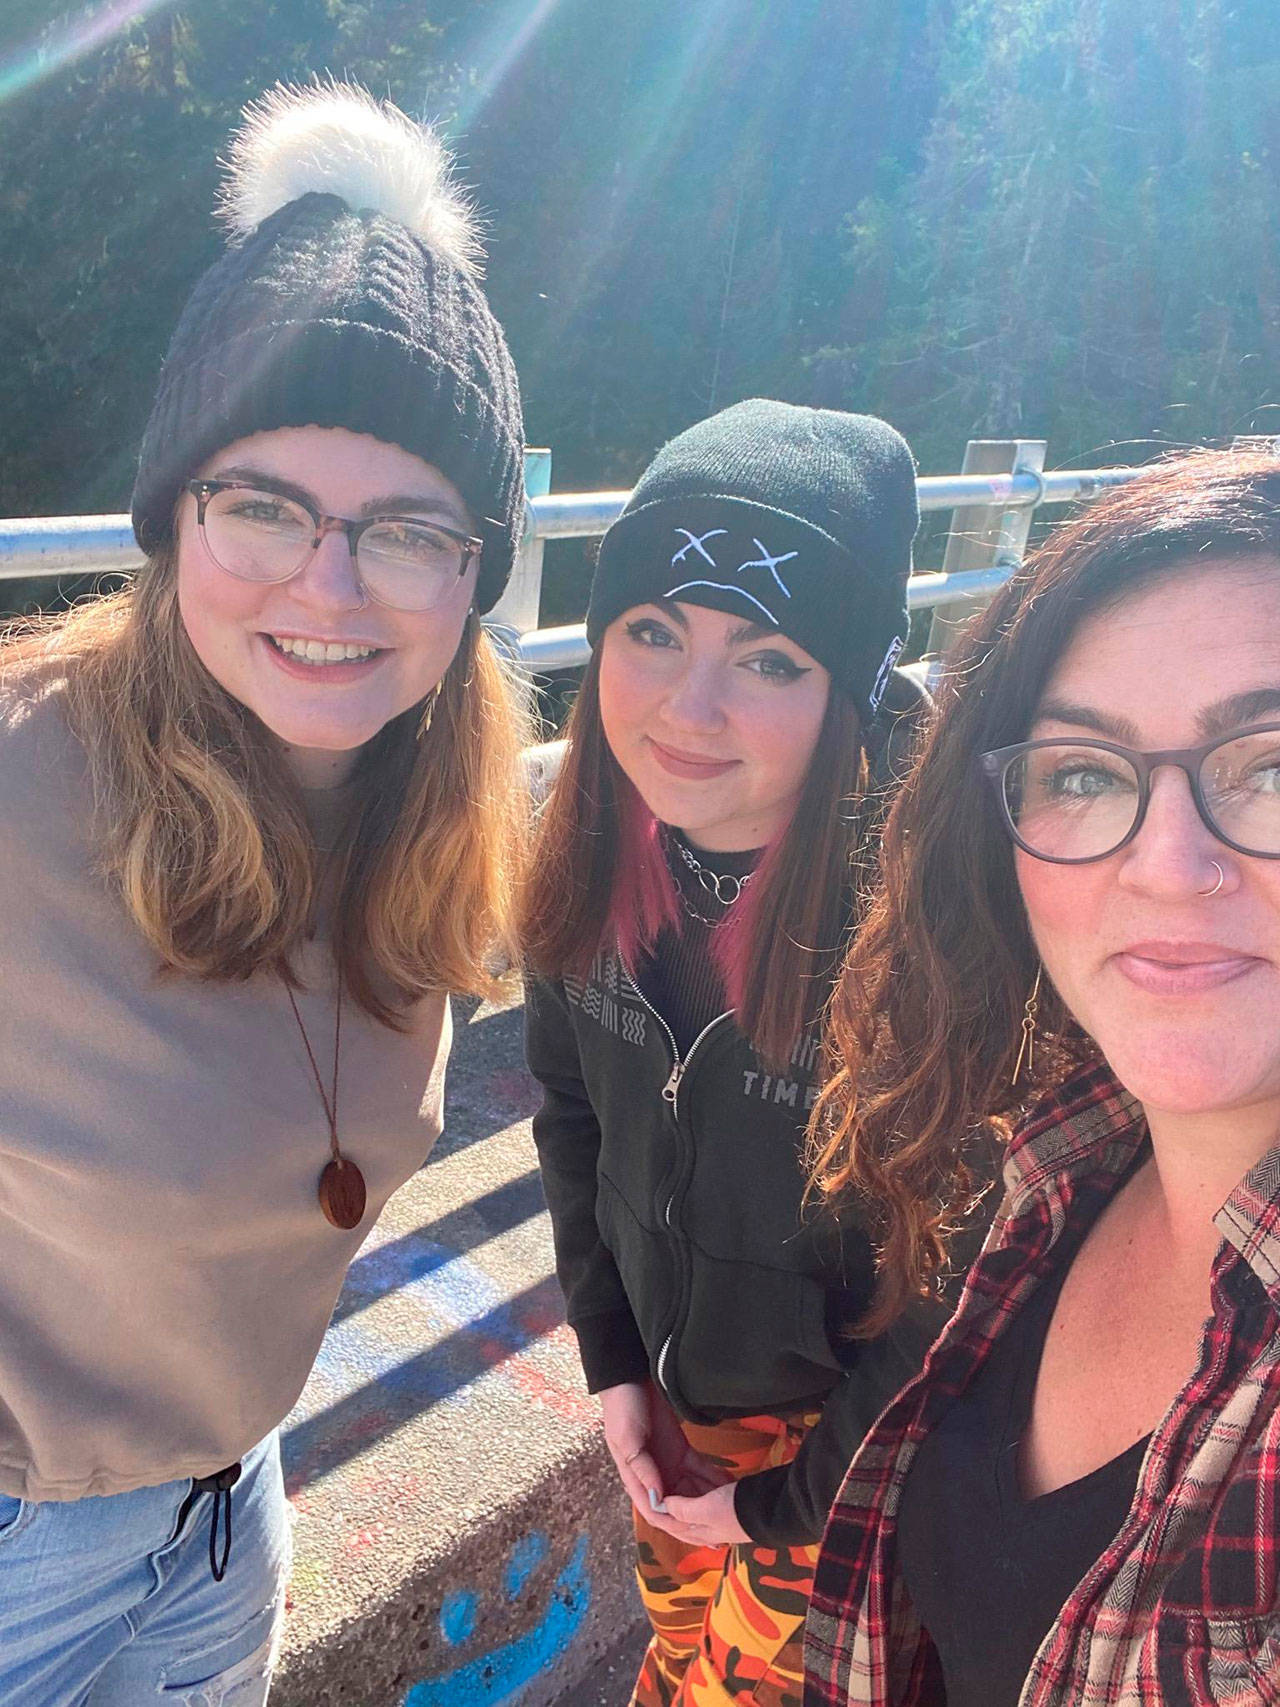 Kim Gray, far right, pictured here with daughters Rylee and Alivia, sustained multiple injuries after a fall in Mexico earlier this month. Photo courtesy of Kim Gray